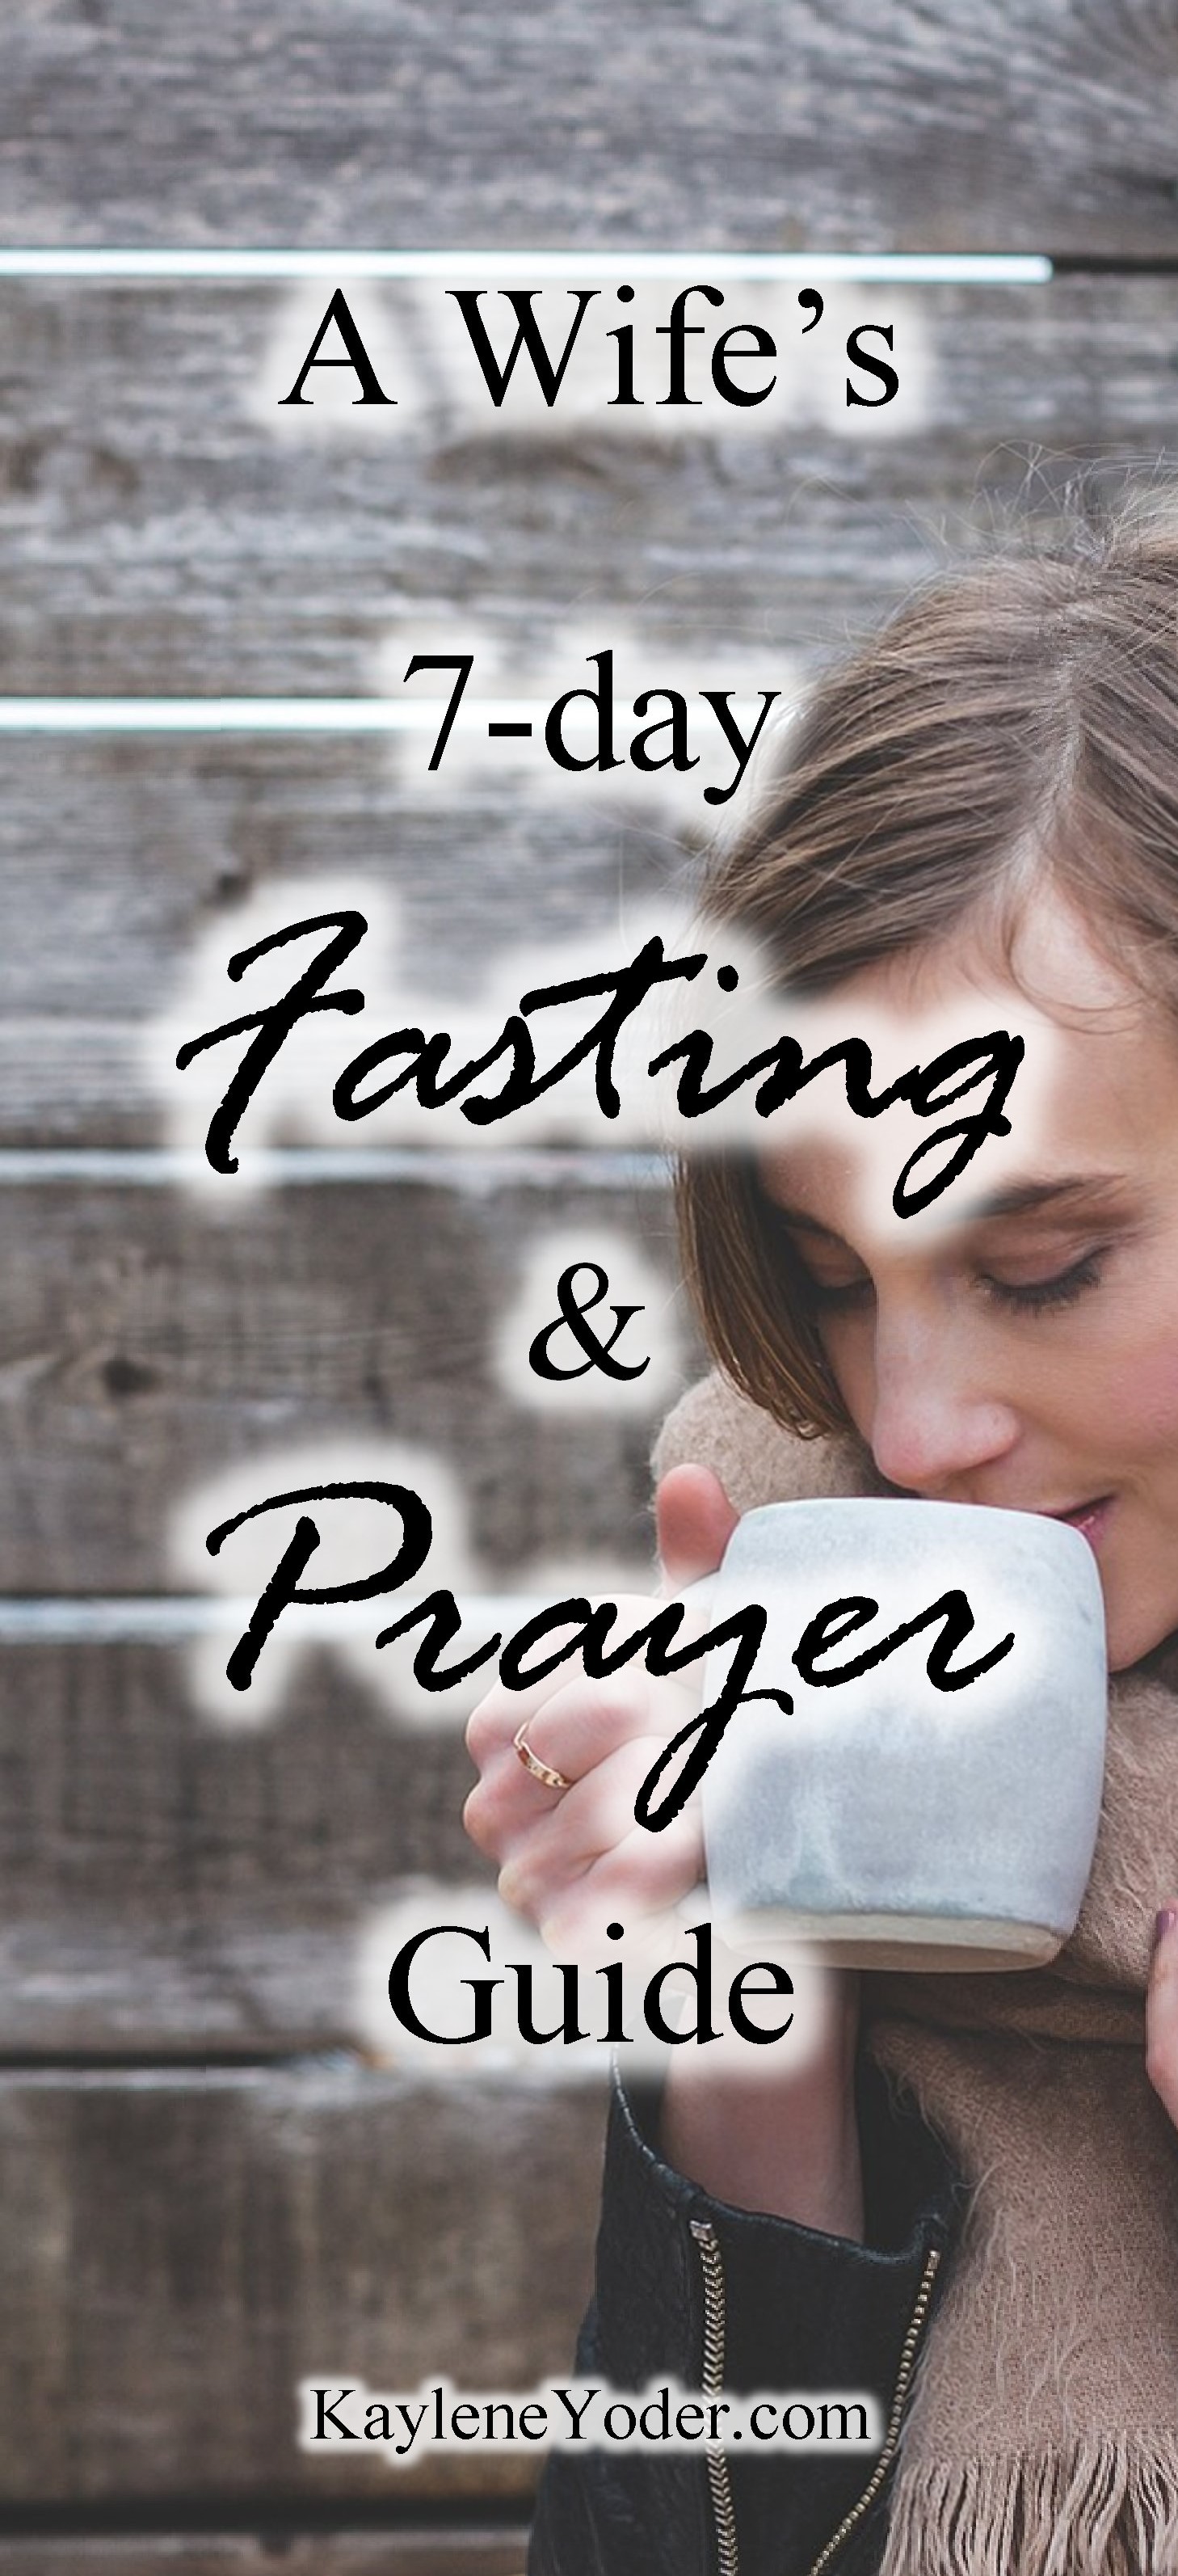 A Scripture-based Prayer for Yourself as a Wife - Kaylene Yoder